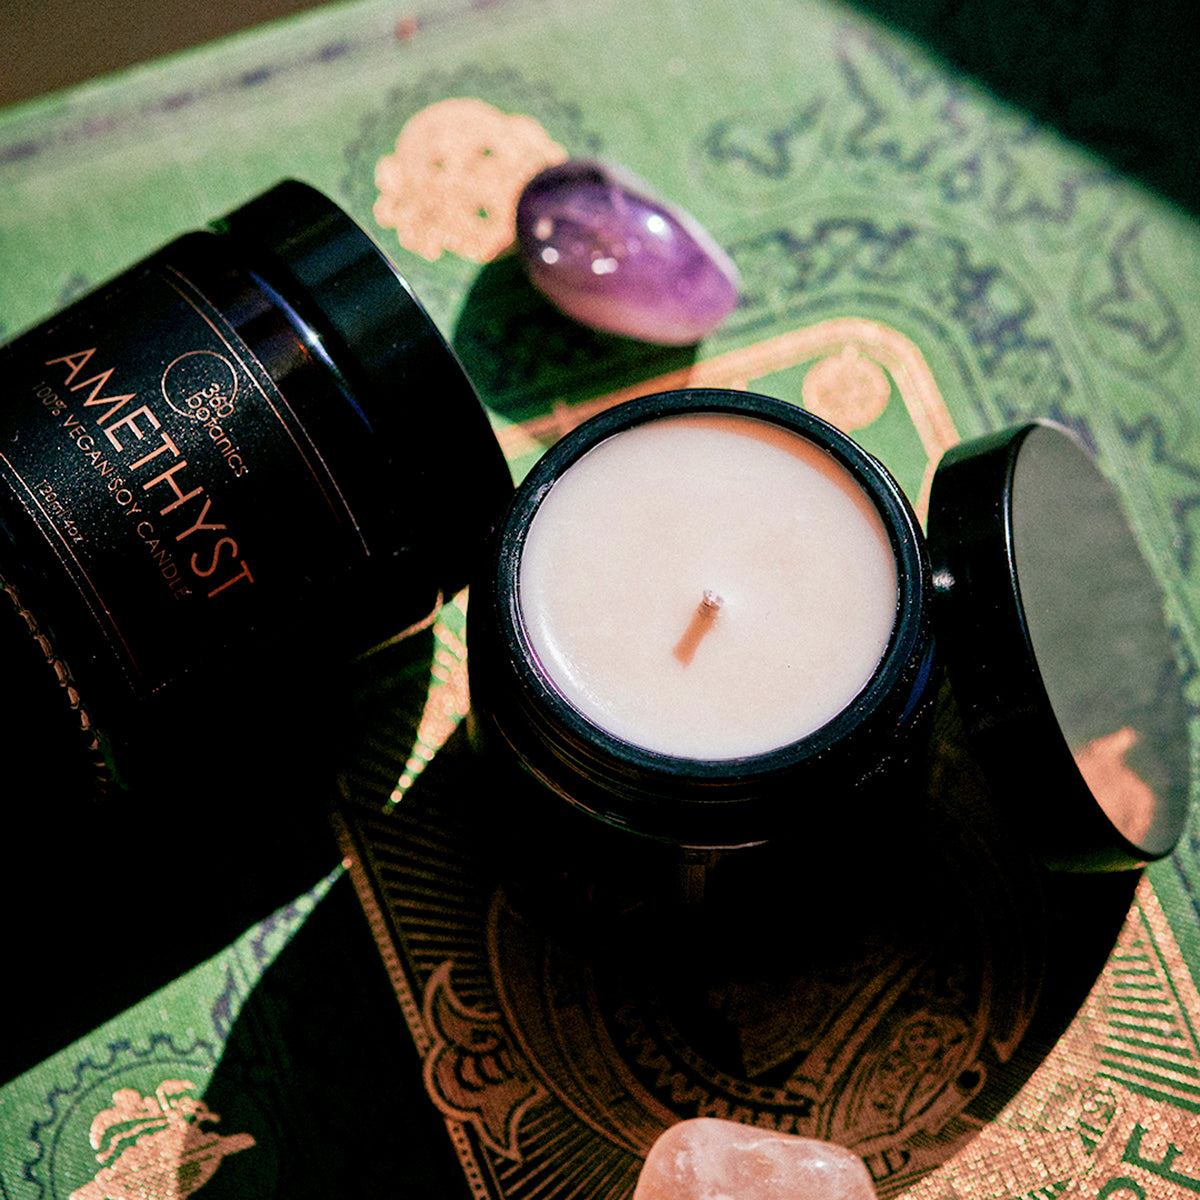  An Amethyst crystal-inspired soy wax candle from 360 Botanics, with a single wick, displayed next to a purple crystal on a green decorative surface.